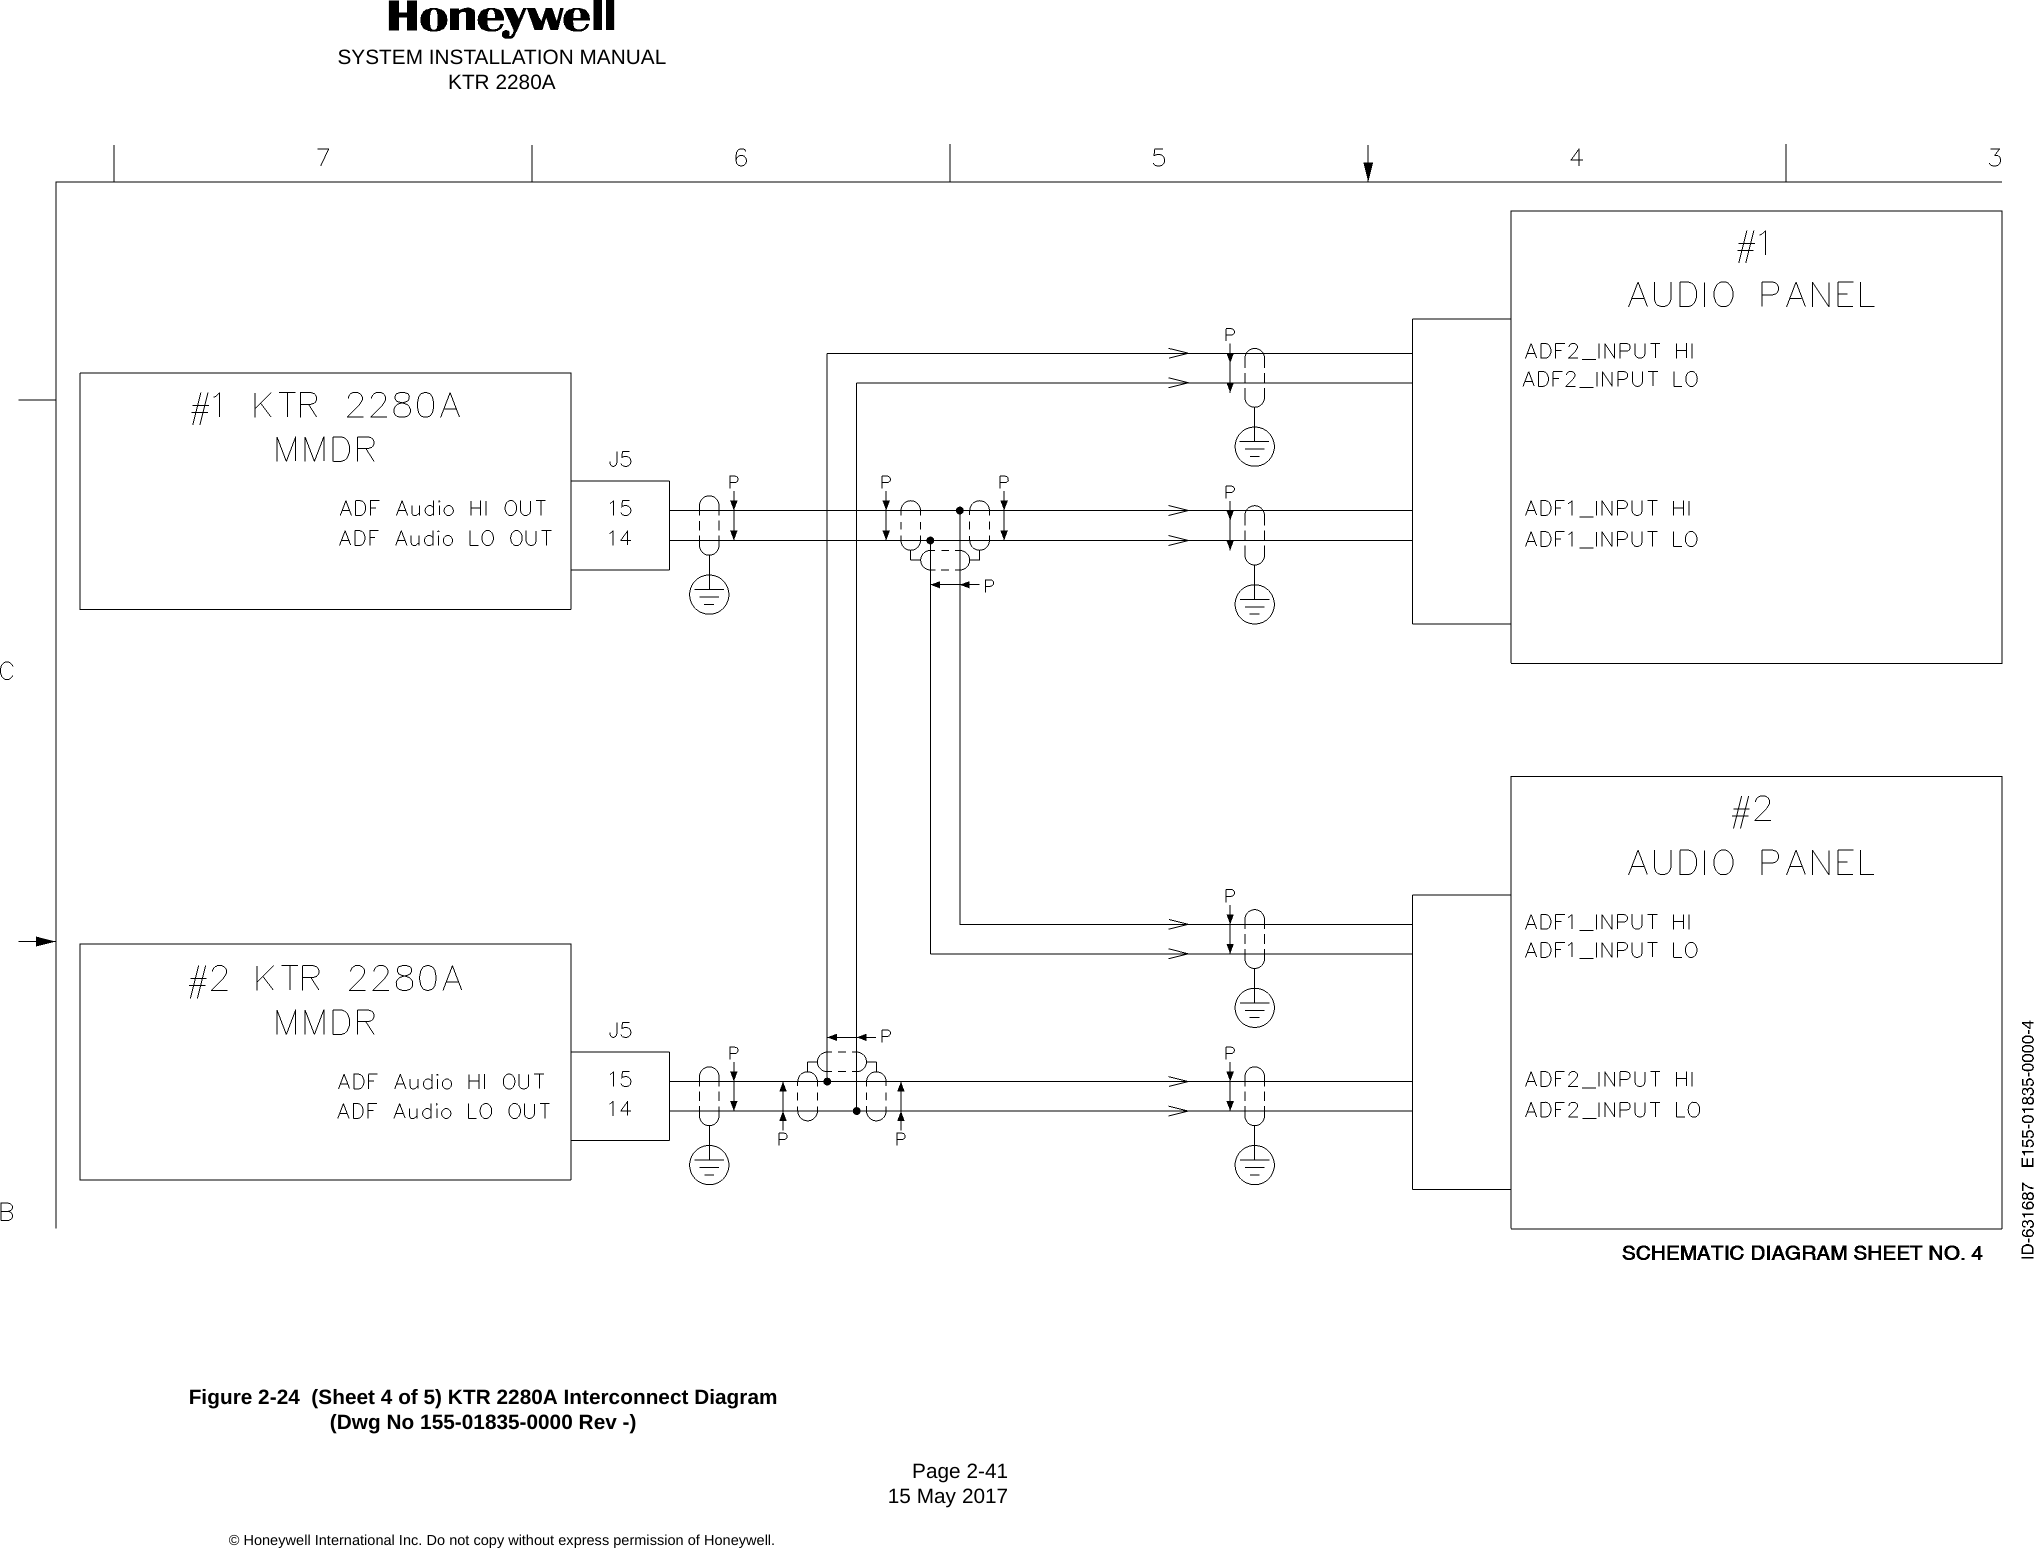 SYSTEM INSTALLATION MANUALKTR 2280APage 2-4115 May 2017© Honeywell International Inc. Do not copy without express permission of Honeywell.Blank PageFigure 2-24  (Sheet 4 of 5) KTR 2280A Interconnect Diagram(Dwg No 155-01835-0000 Rev -)